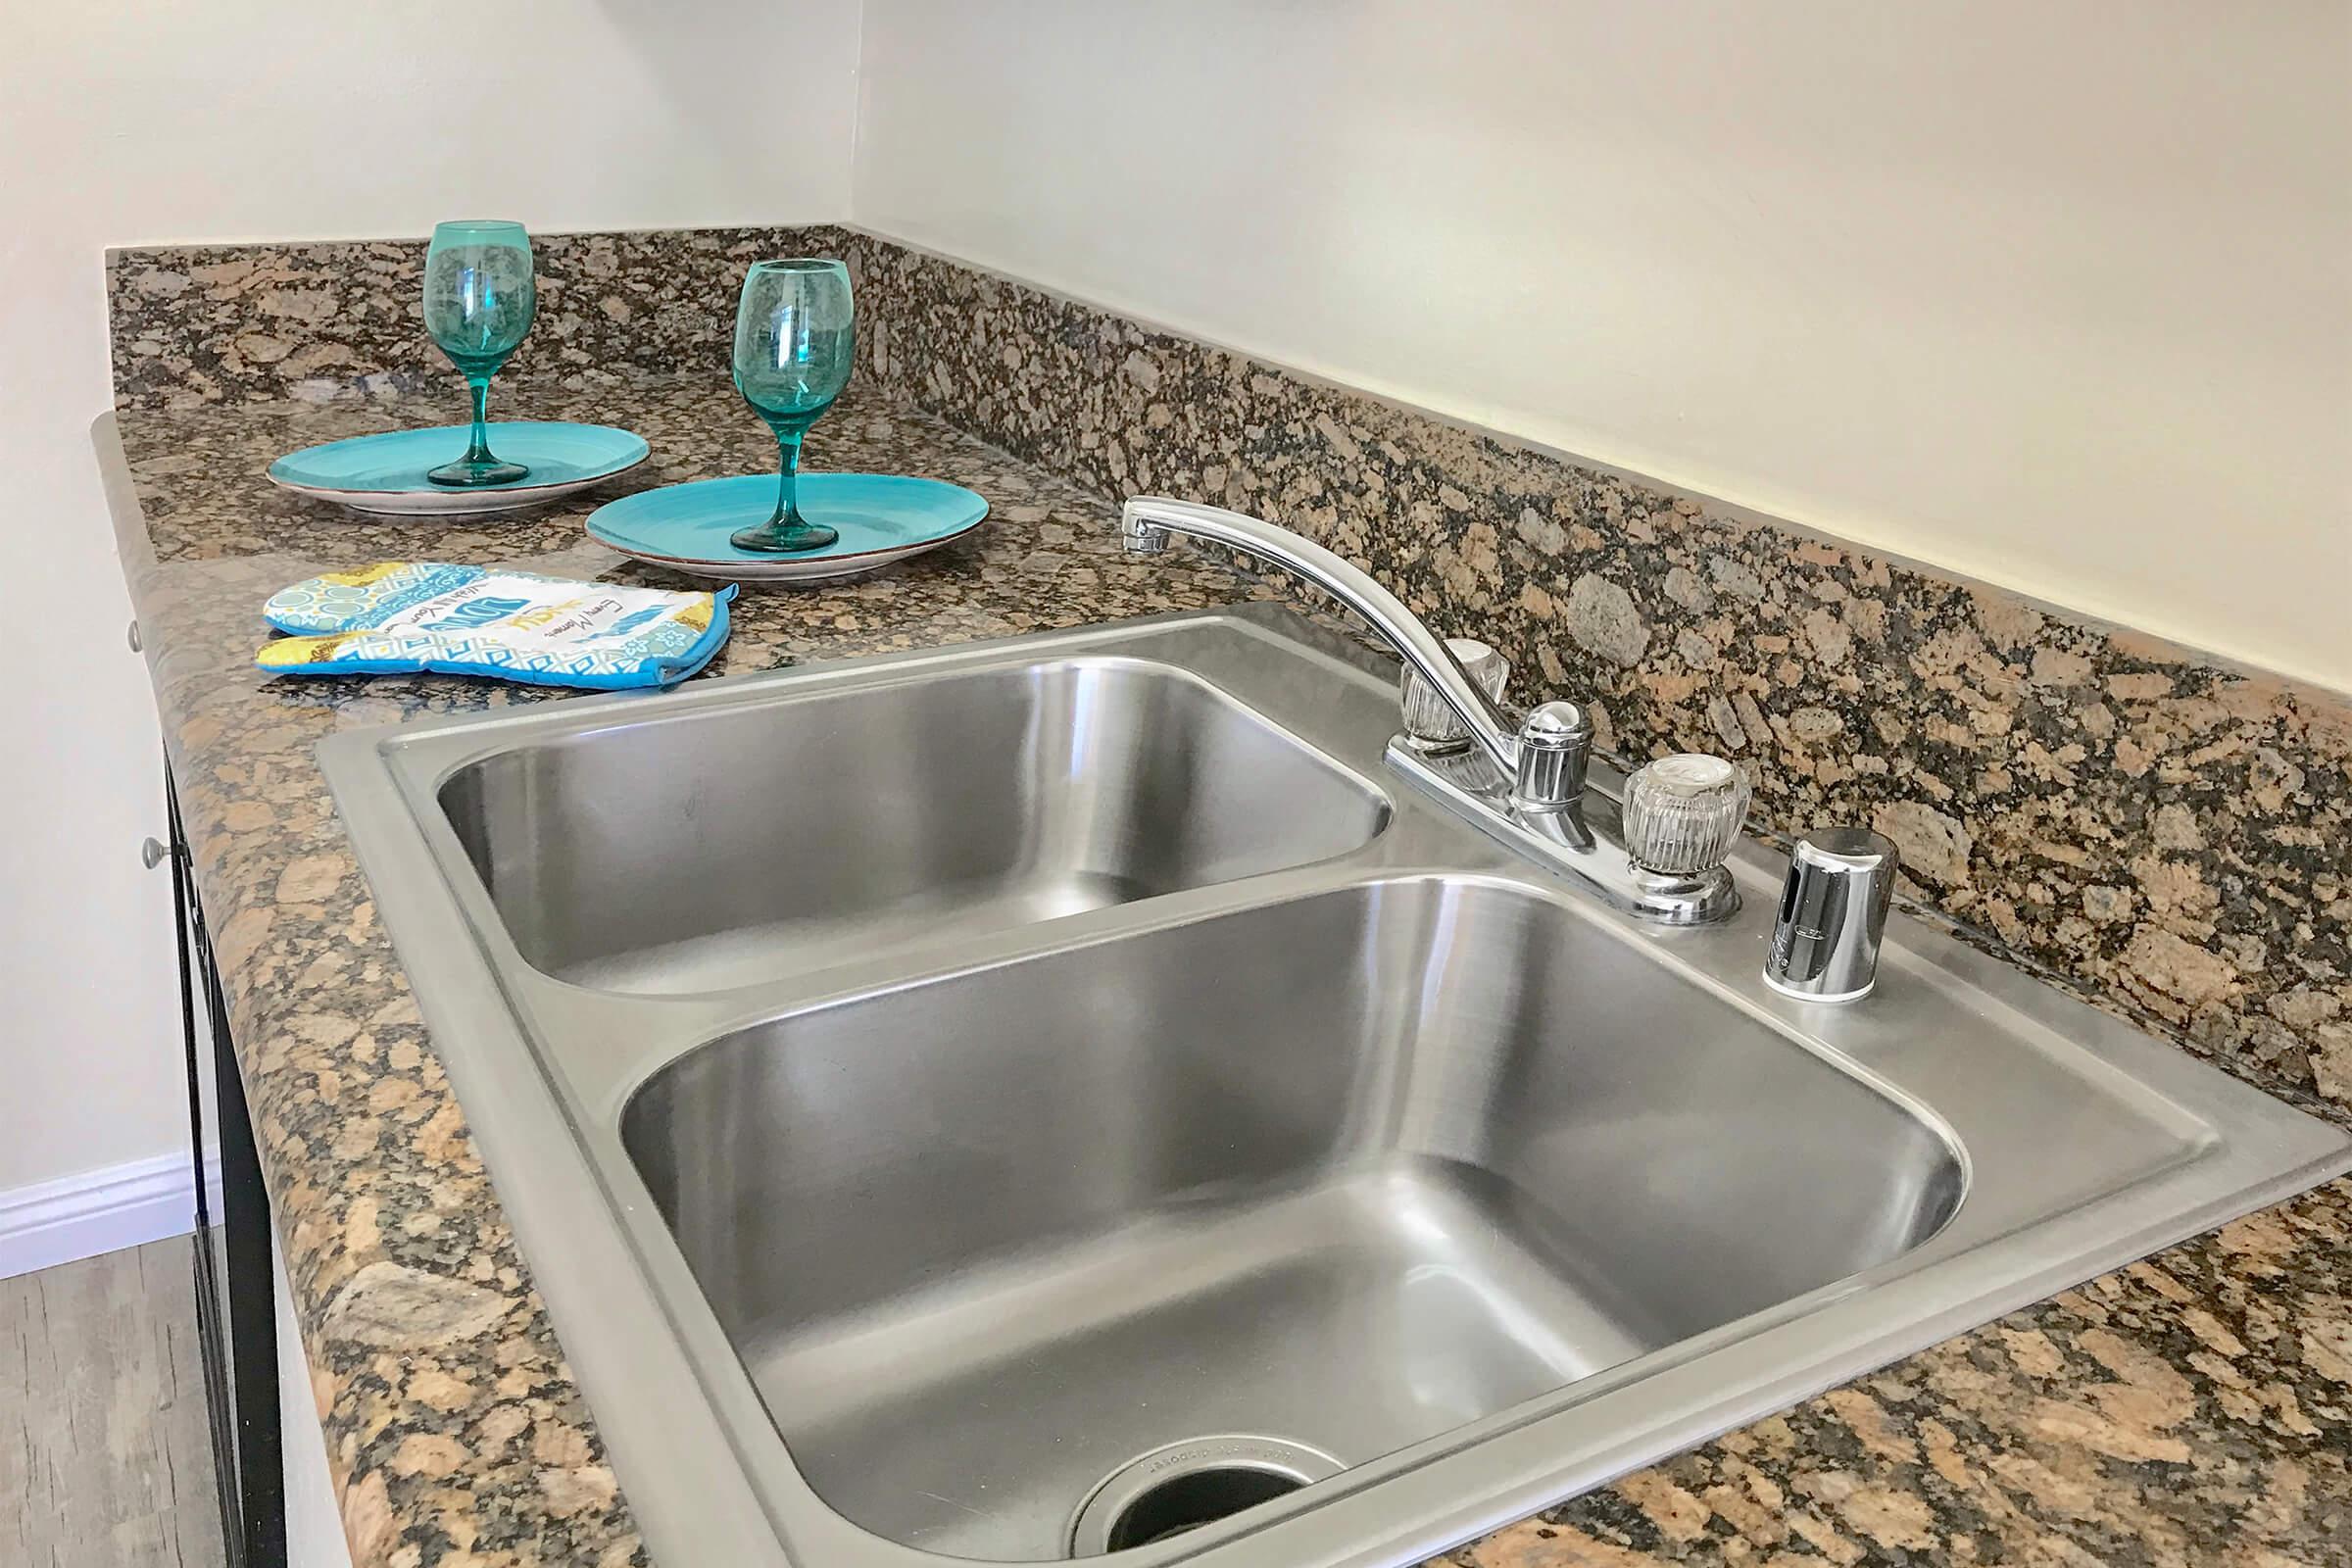 Kitchen sink with white and teal oven glove